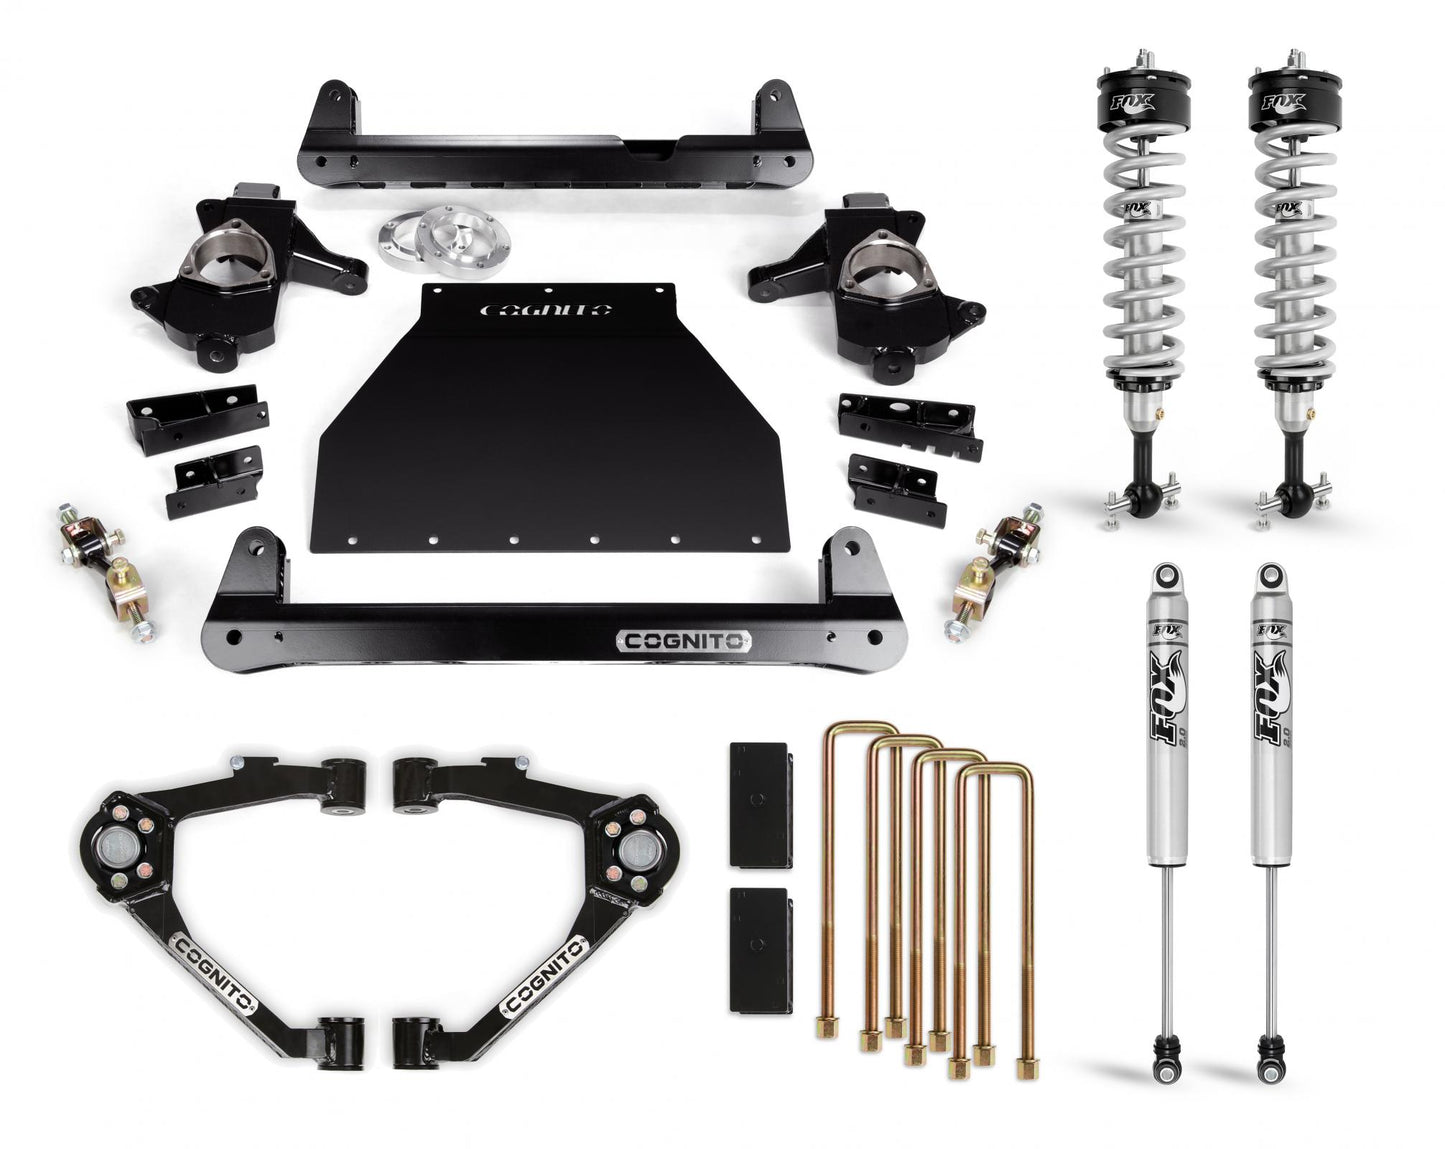 Cognito 4-Inch Performance Lift Kit With Fox PS IFP 2.0 Shocks for 07-18 Silverado/Sierra 1500 2WD/4WD With OEM Cast Steel Control Arms